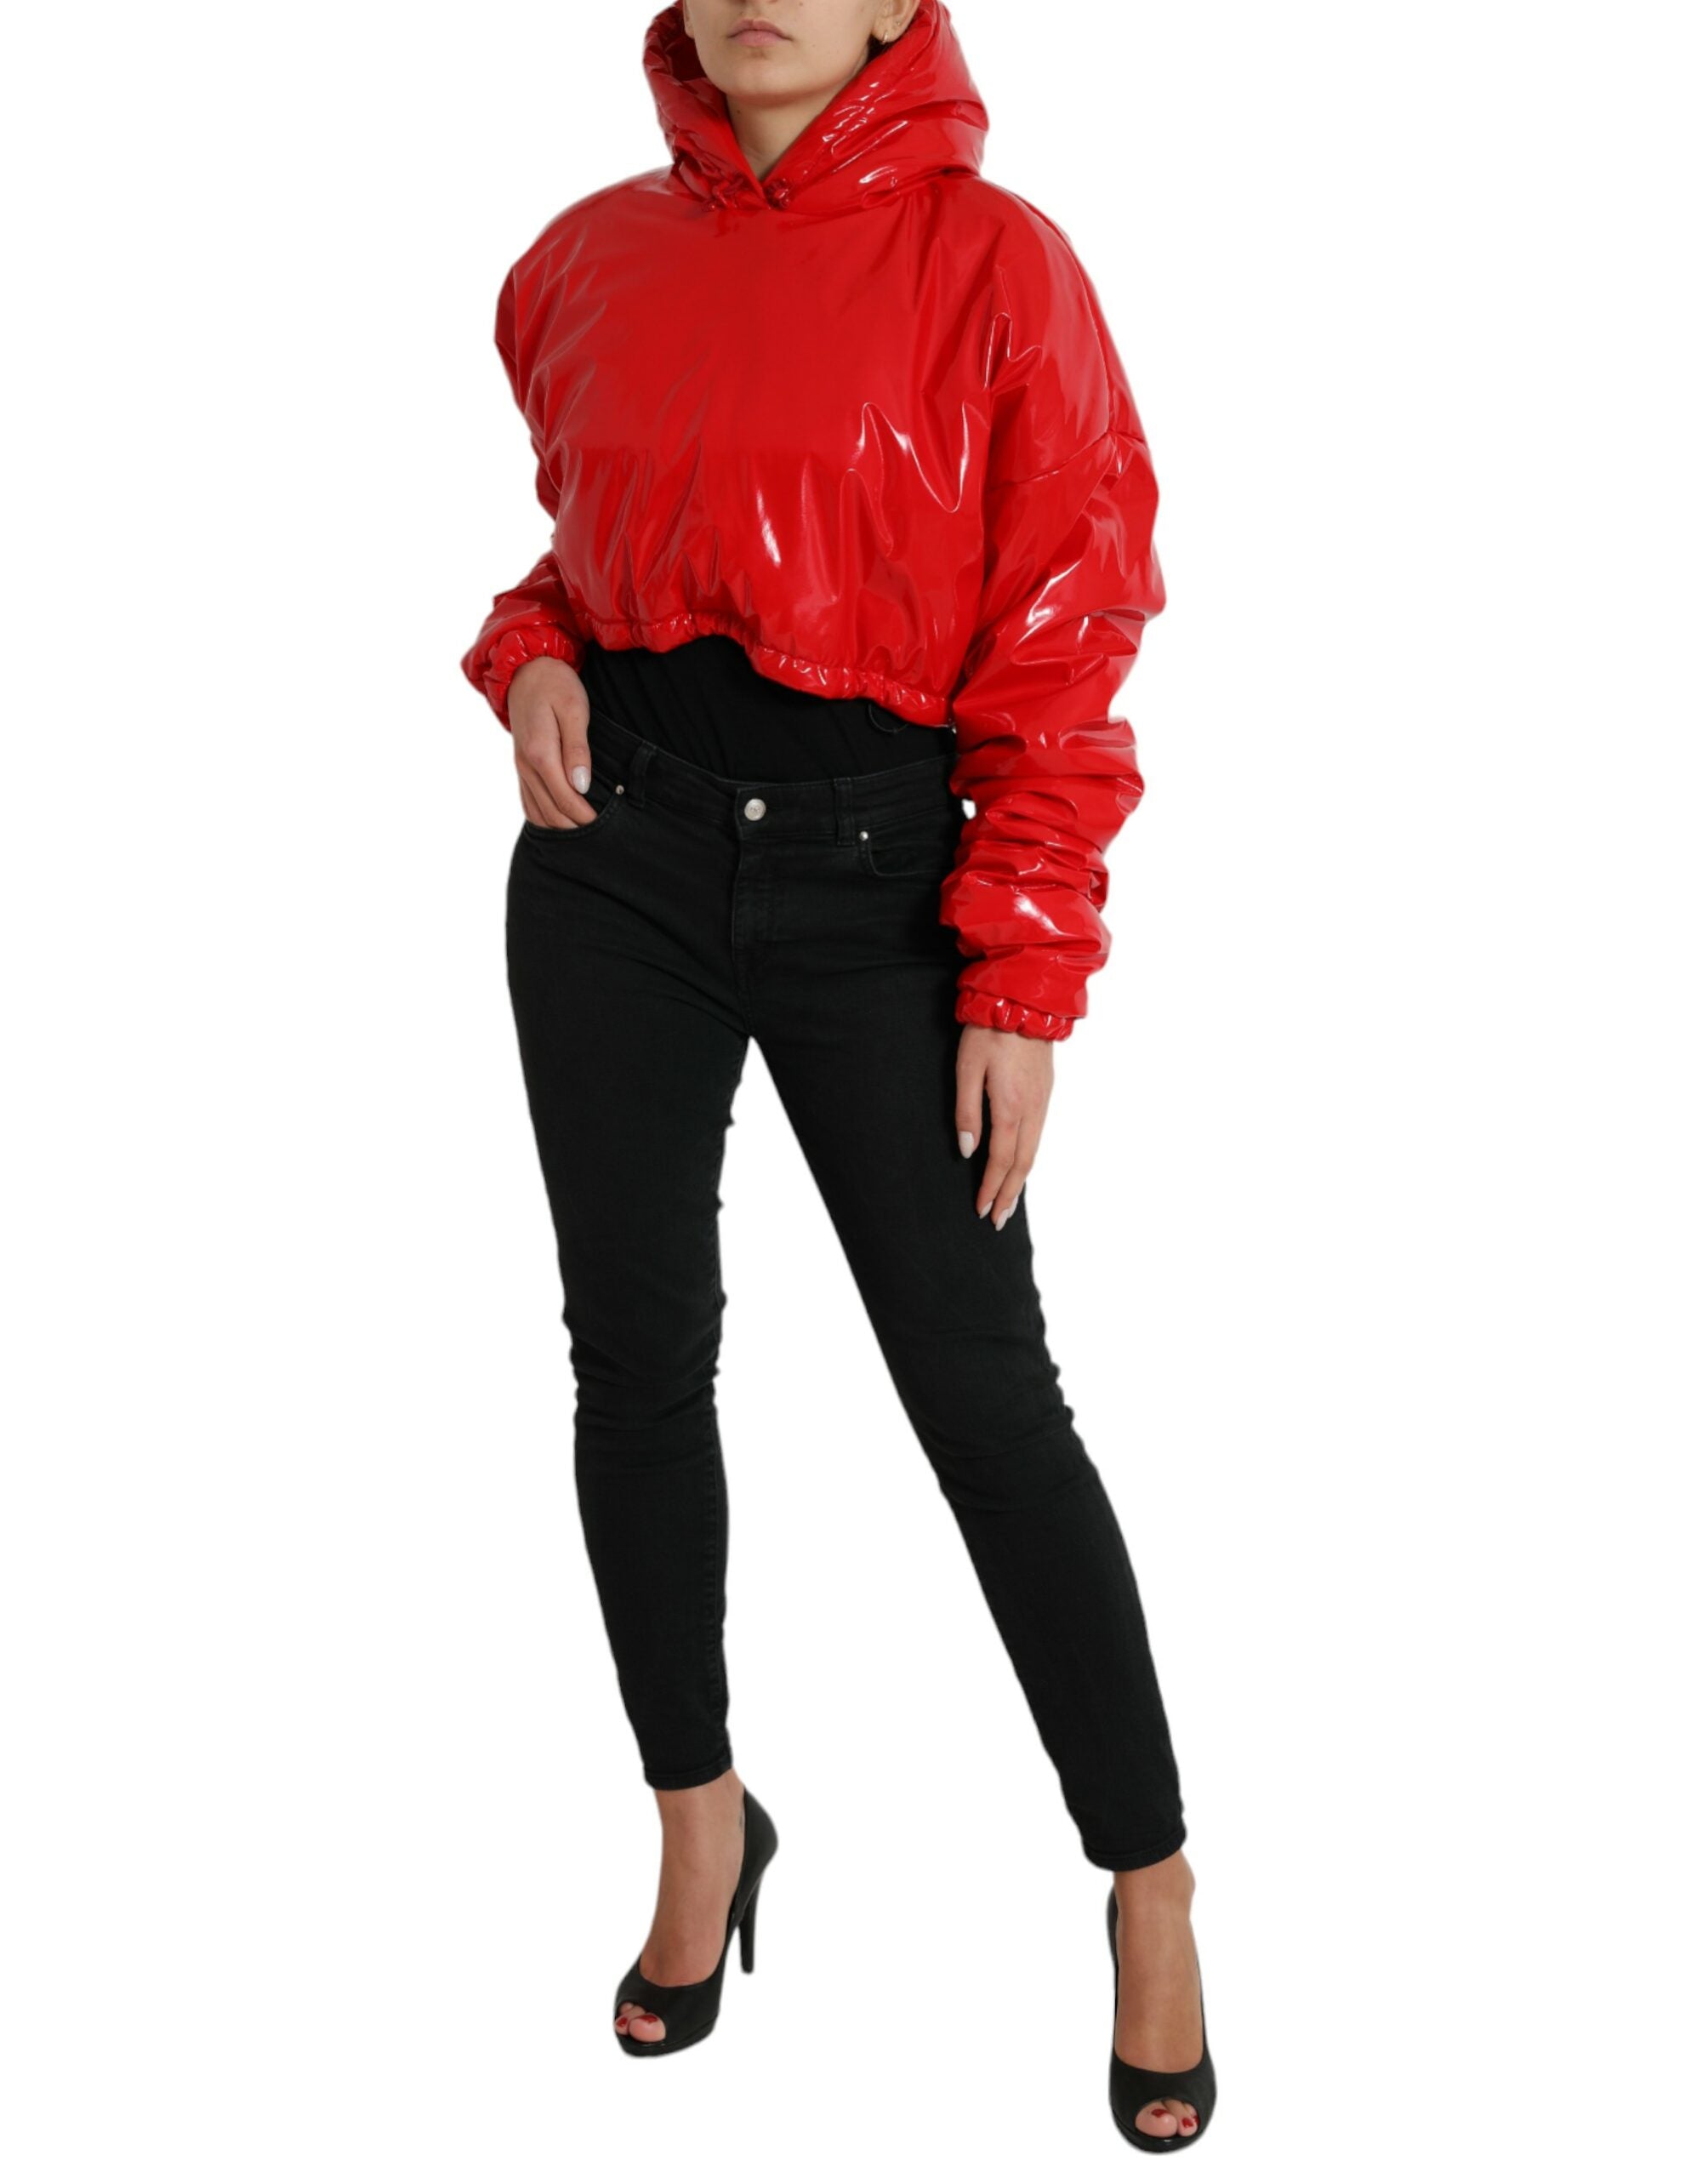 Chic Shiny Red Cropped Jacket